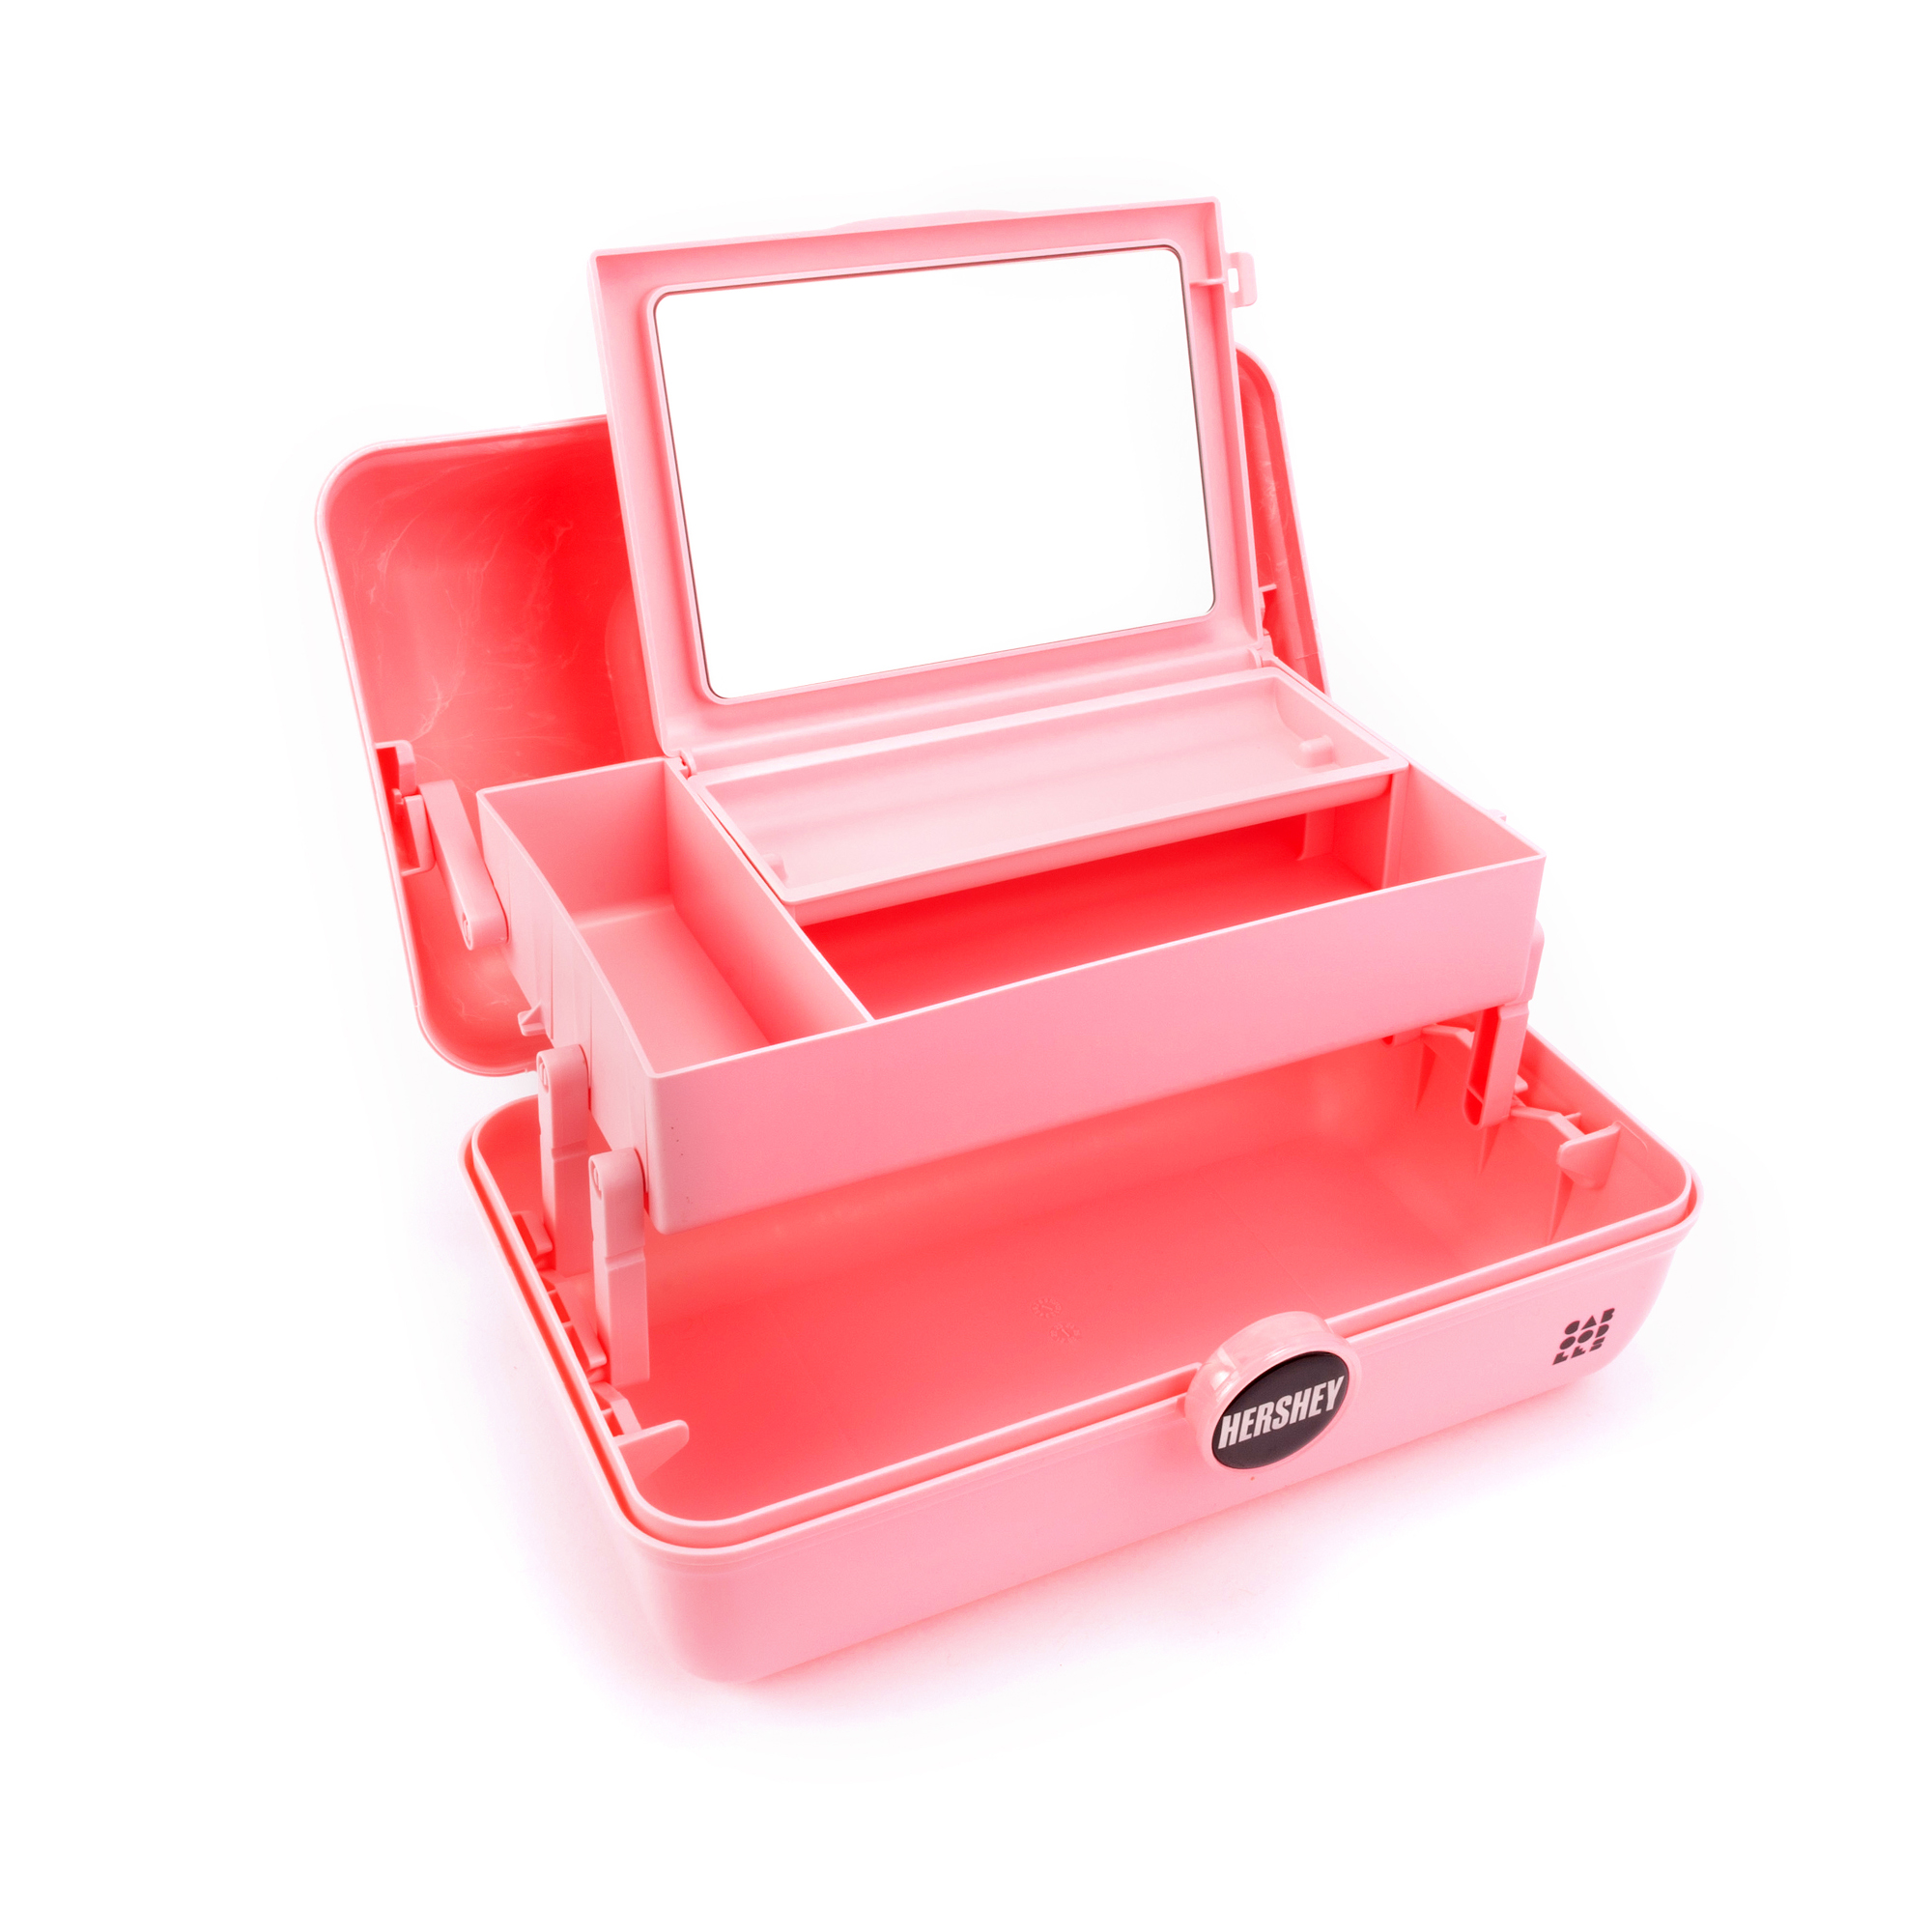 Caboodles x Taste Beauty x Hershey's On The Go Girl Cosmetic case with 13 piece cosmetic set - image 4 of 6